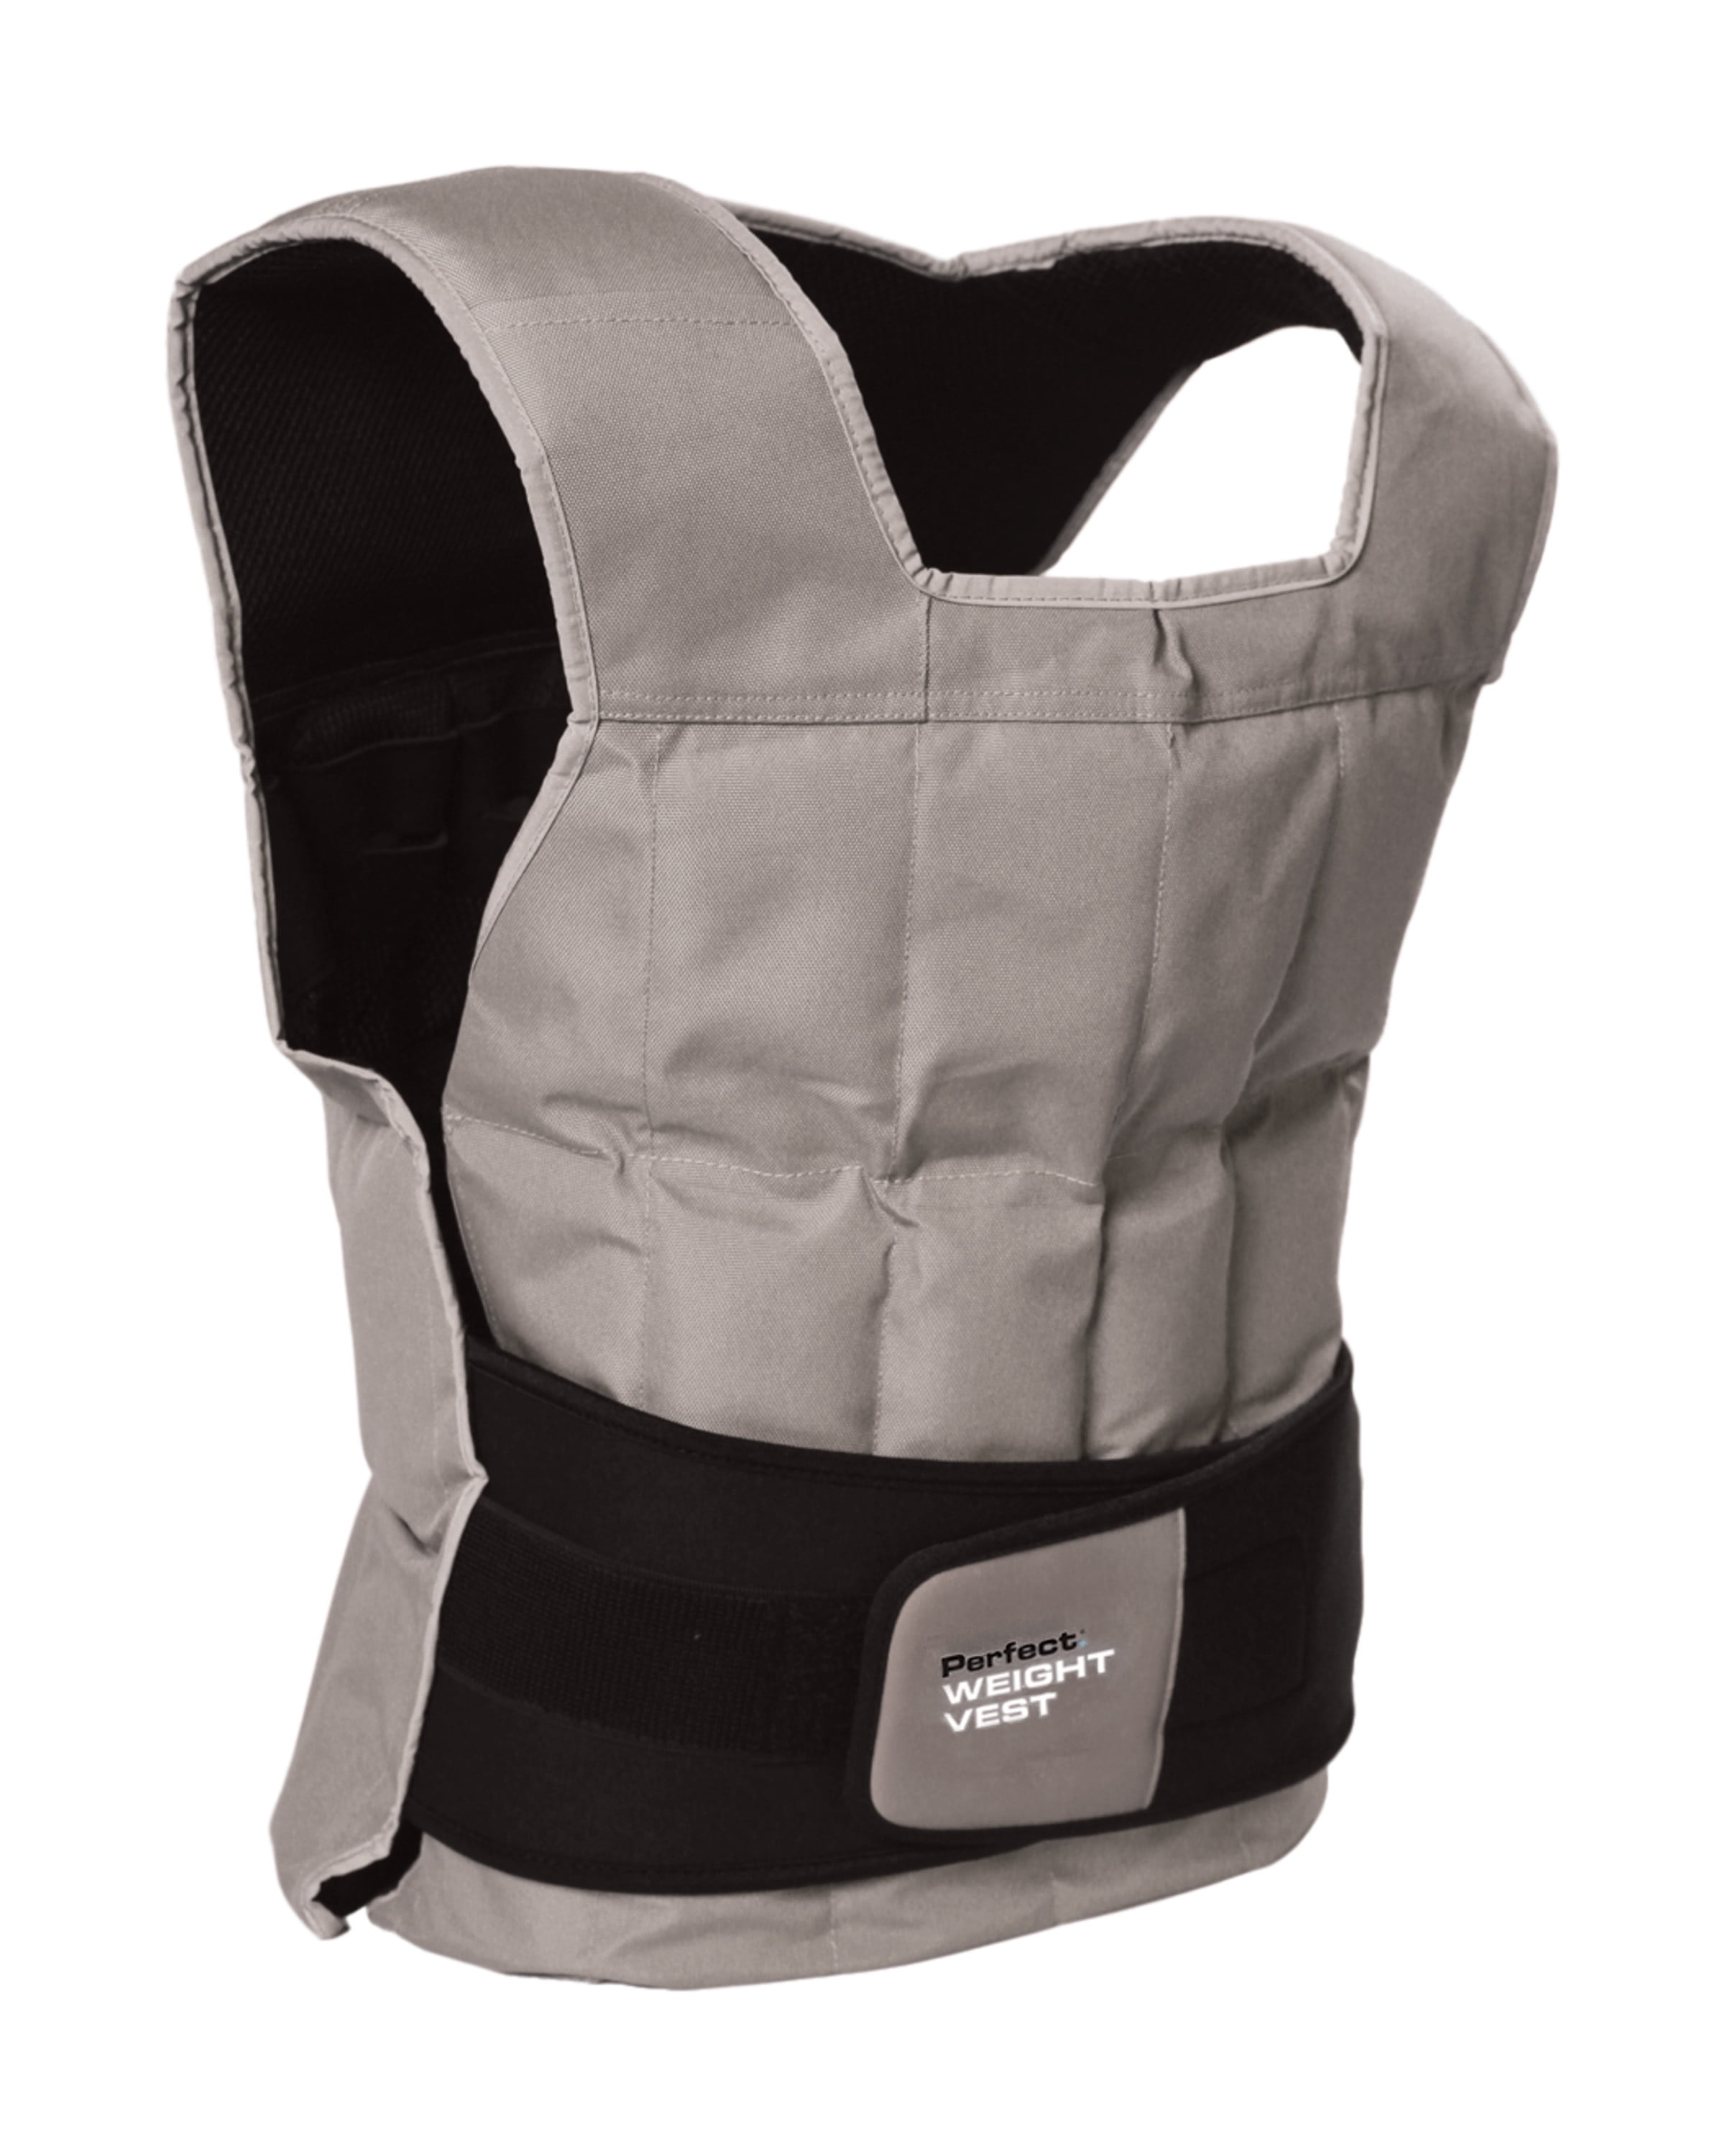 40lbs BLACK Weighted vest with shoulder pad Swift360 weight included 